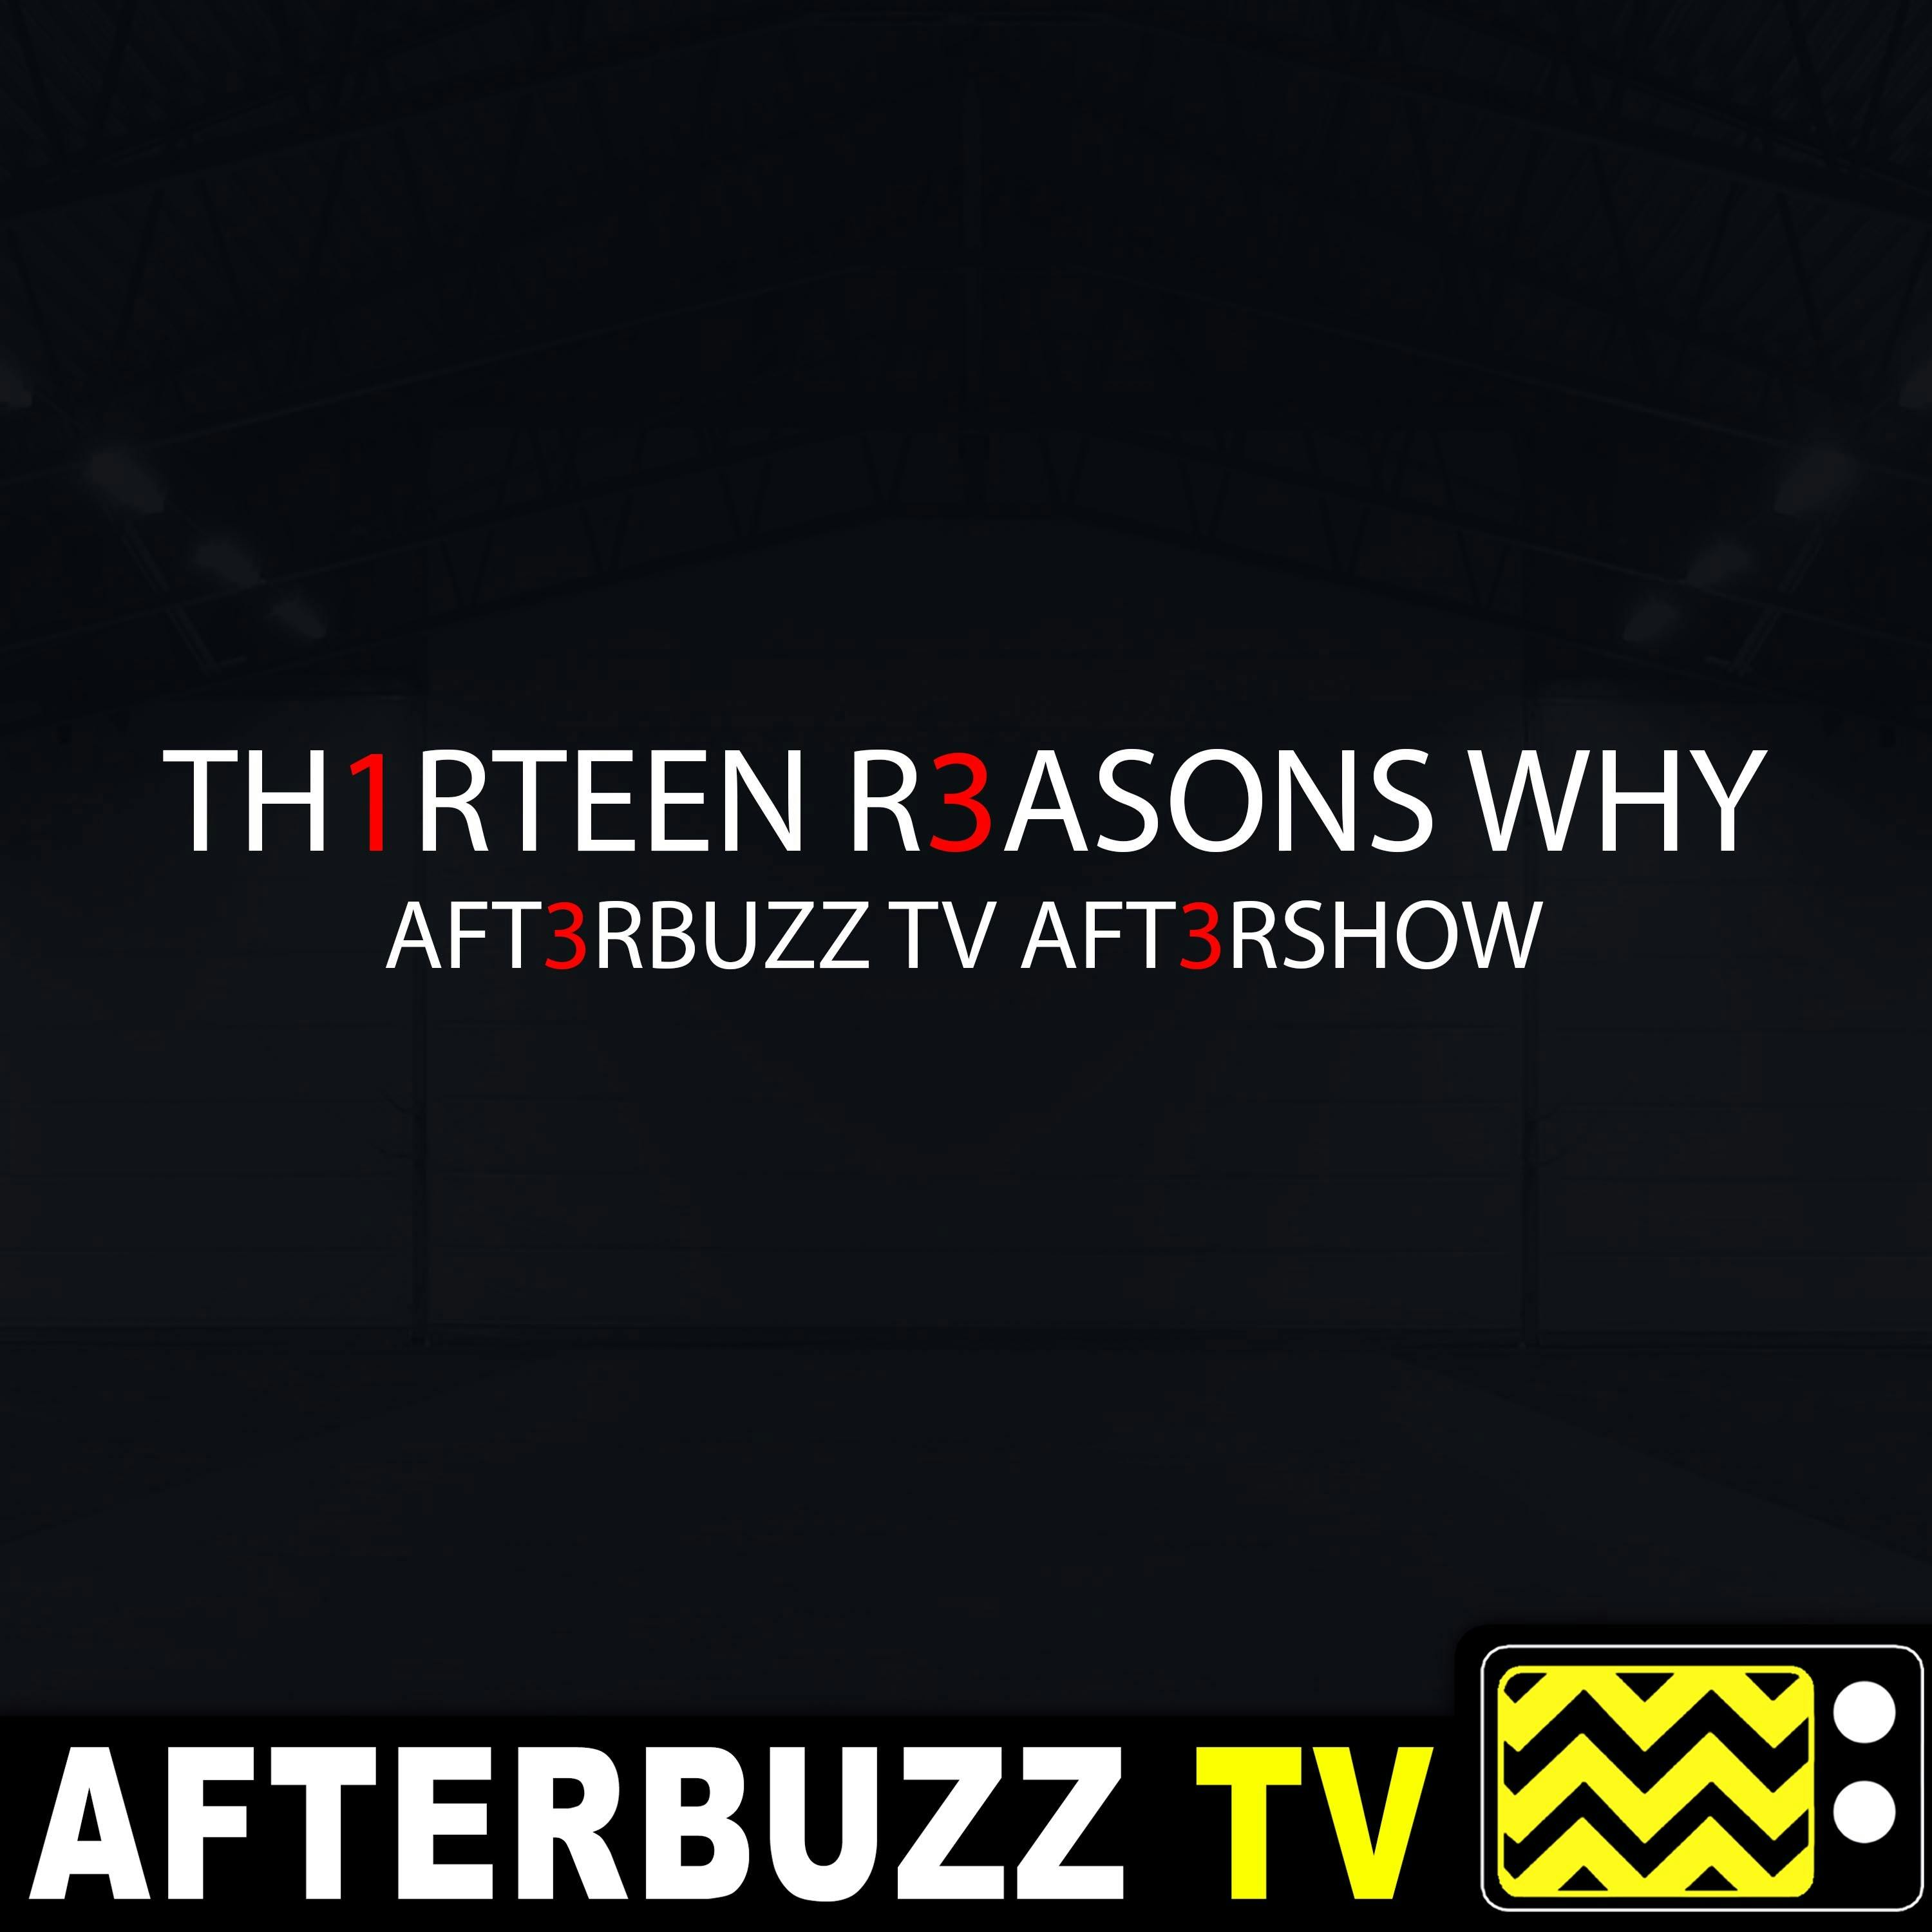 13 Reasons Why S:1 | Steven Silver Guests on Tape 3 Side B; Tape 4 Side A E:6 & E:7 | AfterBuzz TV AfterShow